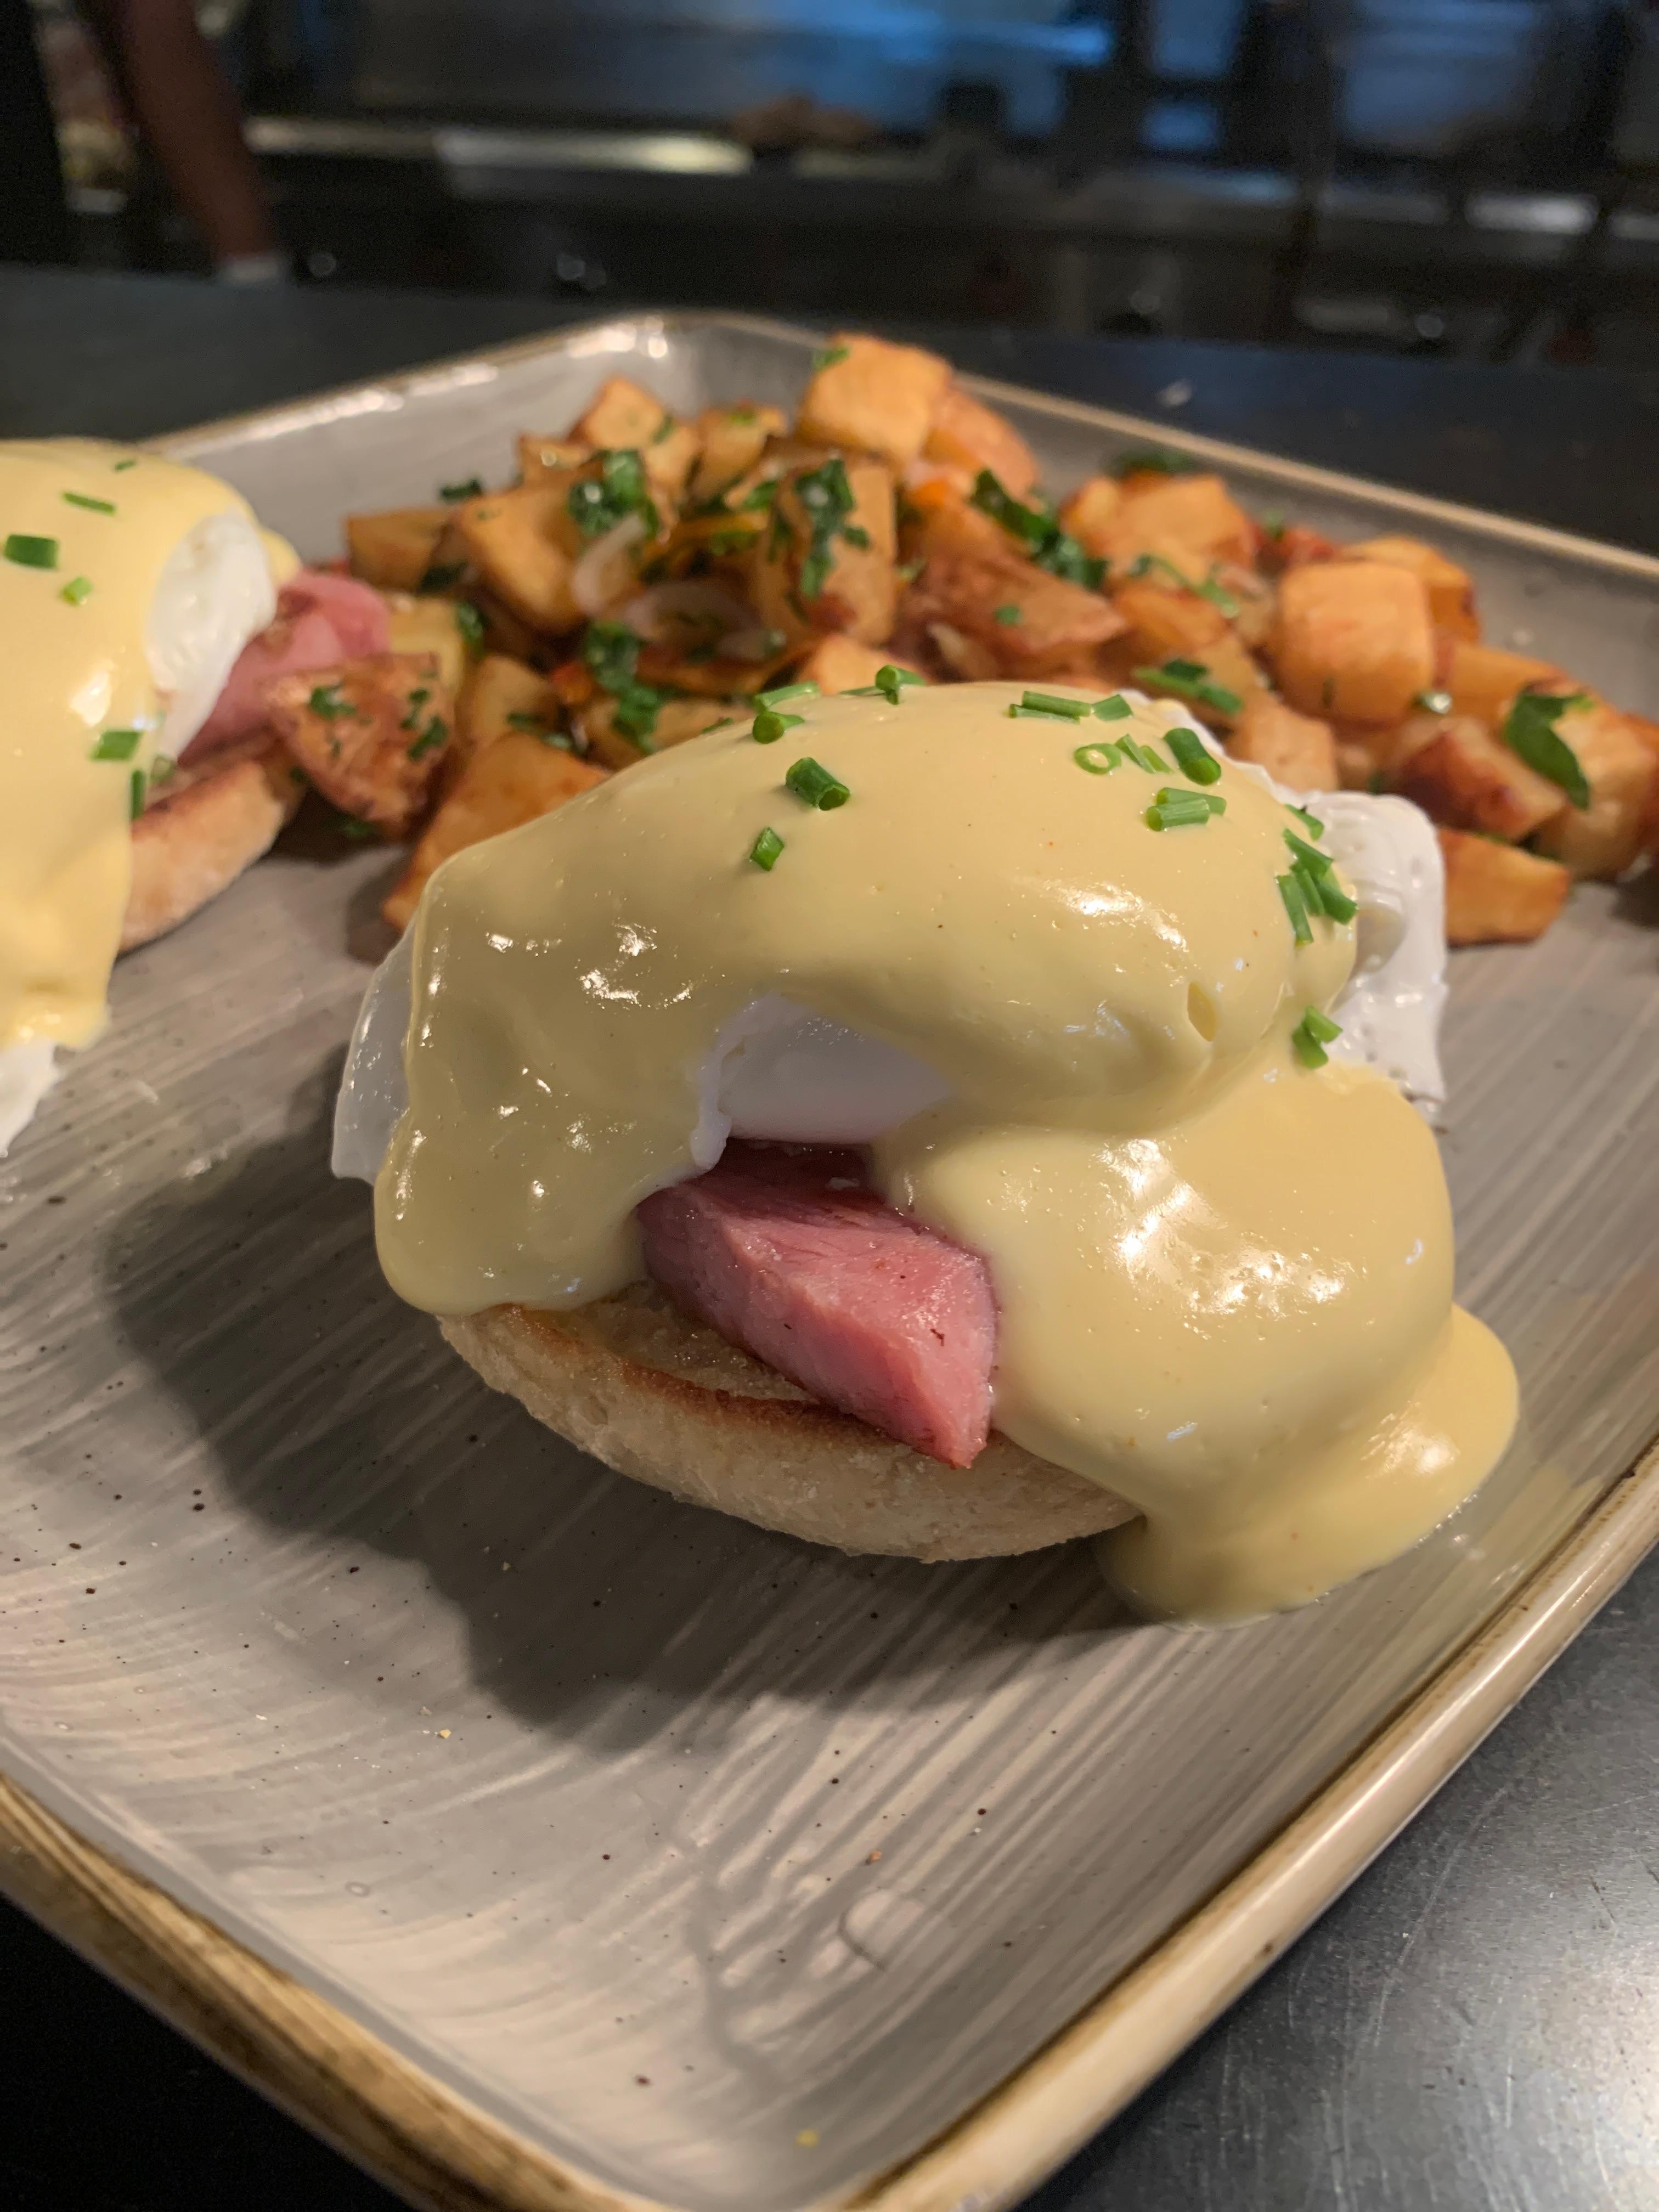 Traditional Benedicts